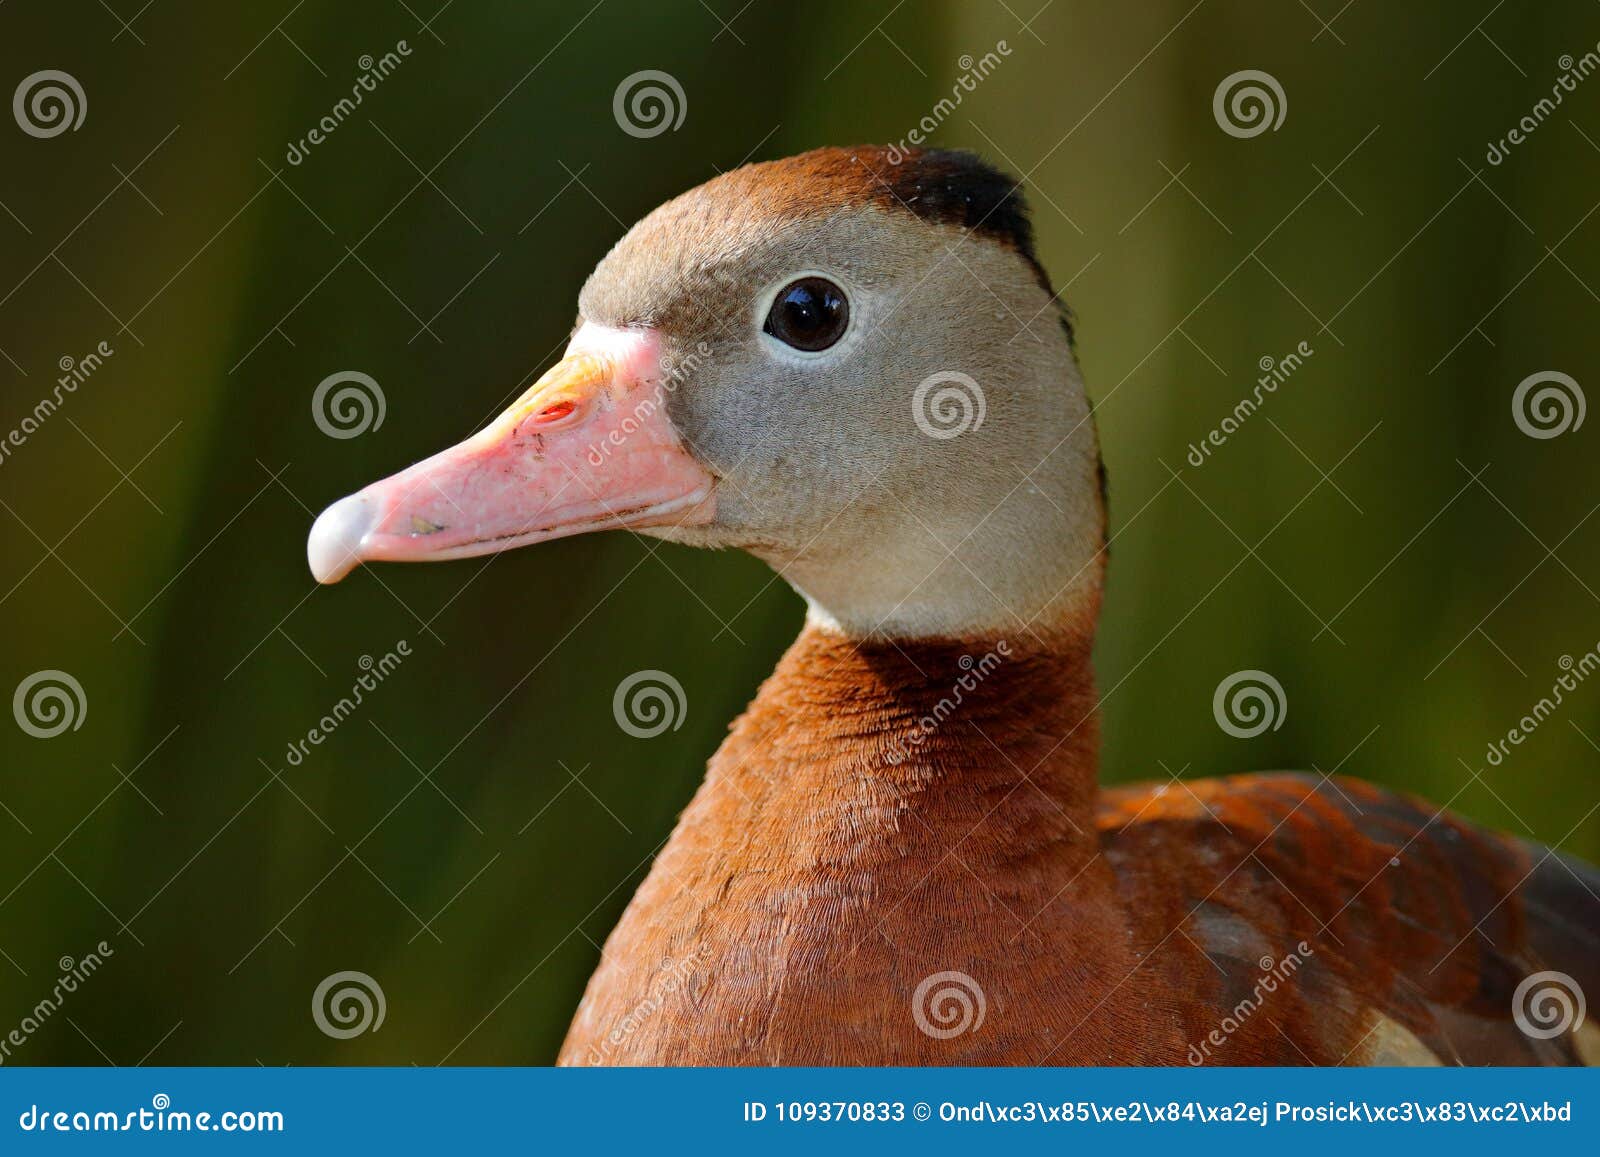 black-bellied whistling-duck, dendrocygna autumnalis, brown birds in the water march, animal in the nature habitat, costa rica. du